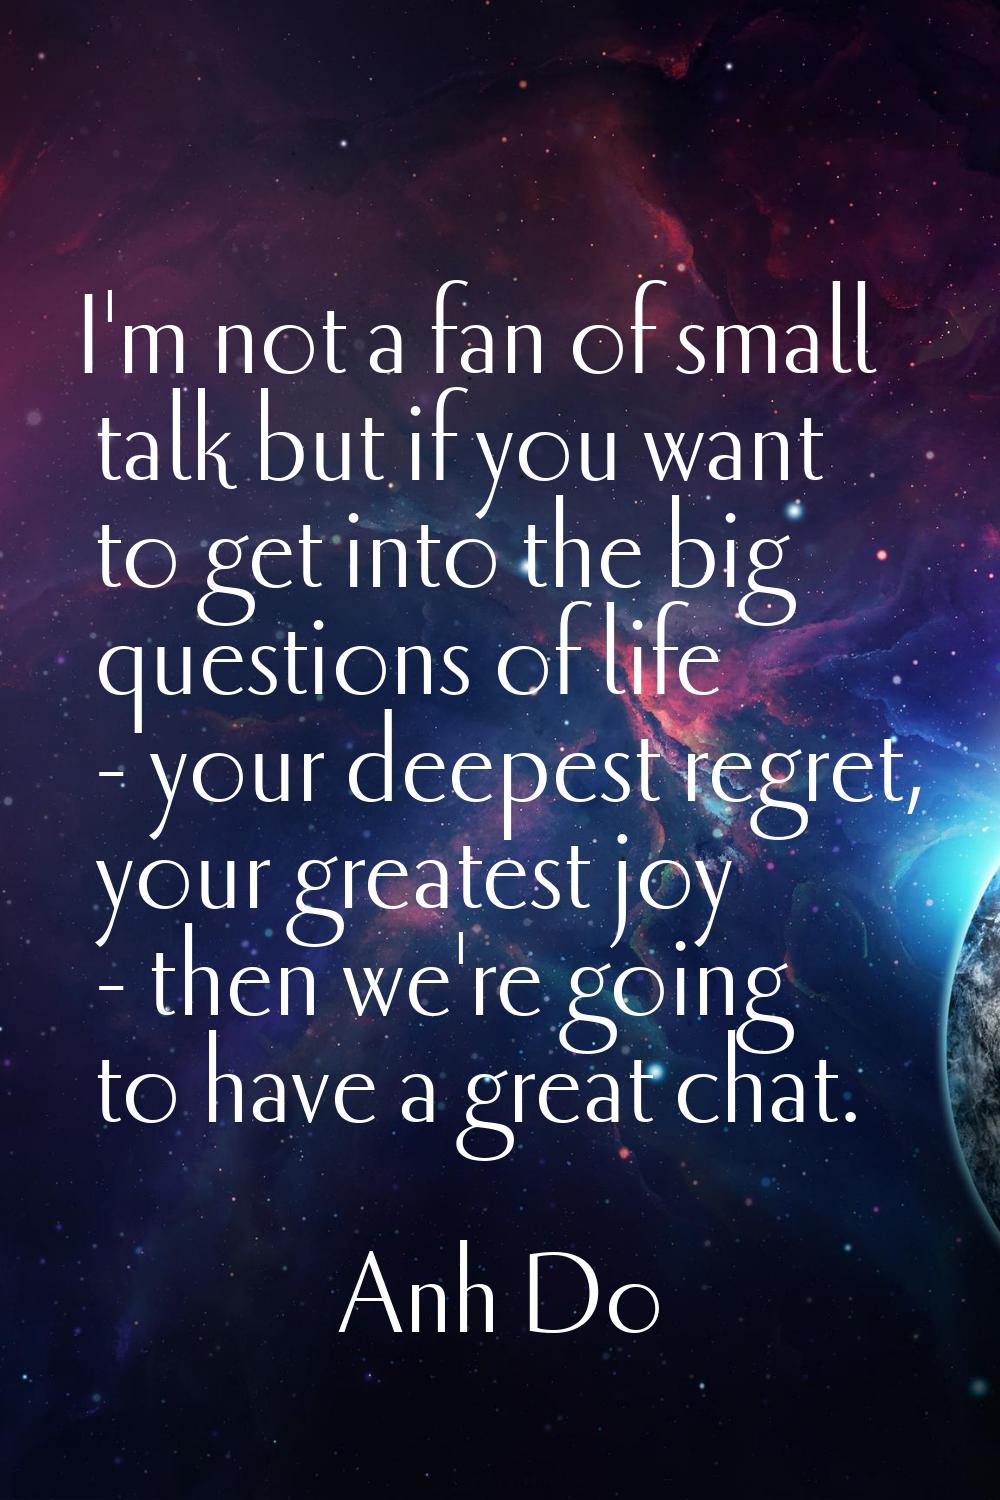 I'm not a fan of small talk but if you want to get into the big questions of life - your deepest re